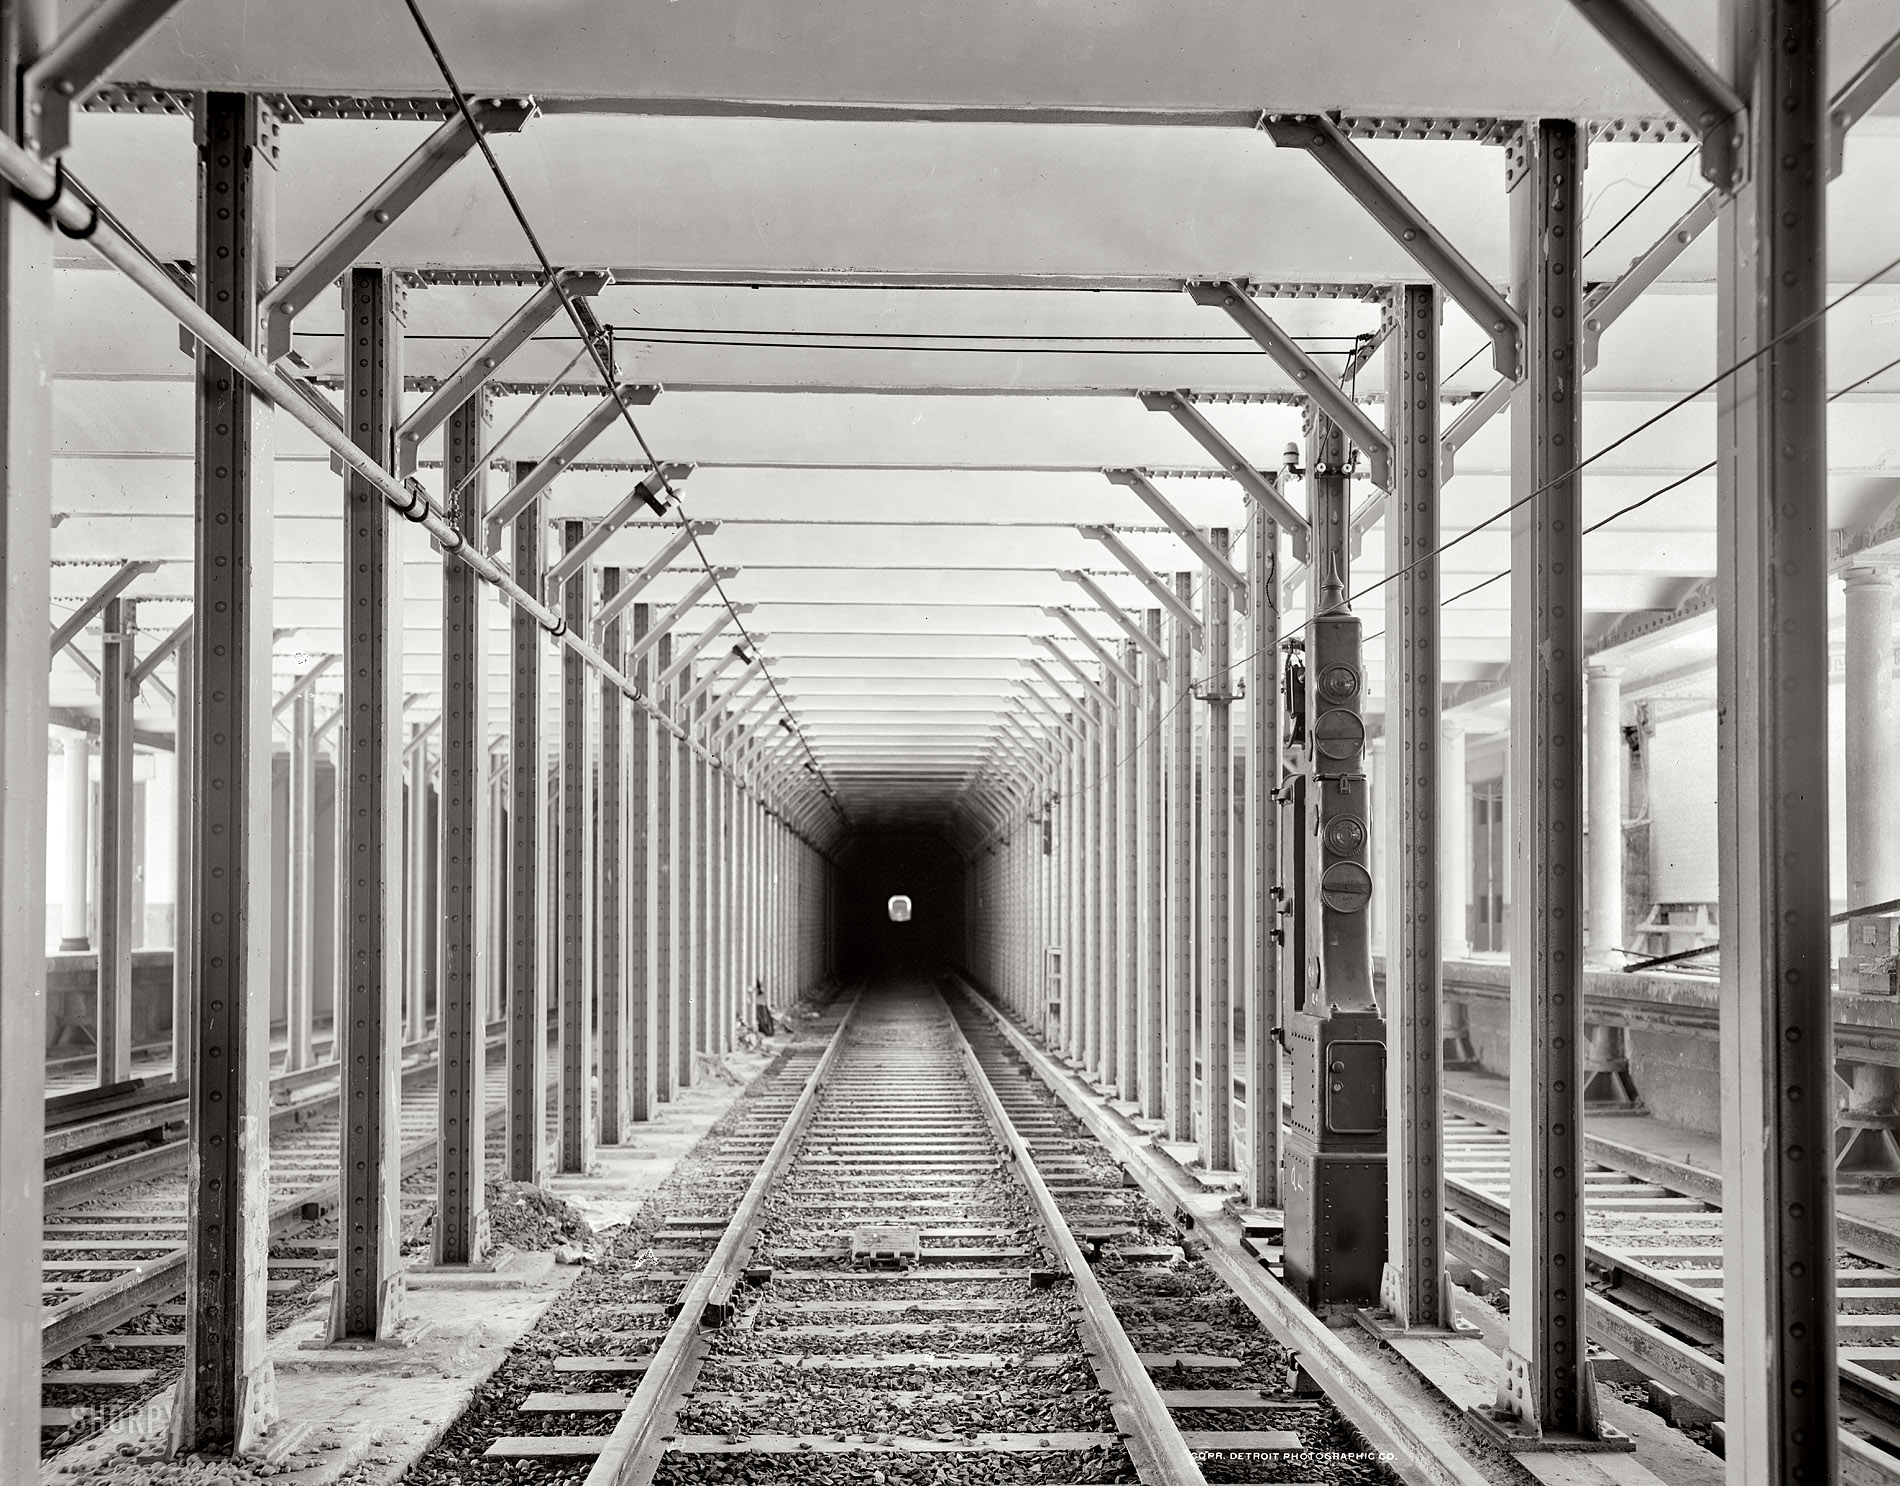 New York City circa 1904. "In the subway." 8x10 inch dry plate glass negative, Detroit Publishing Company. View full size.